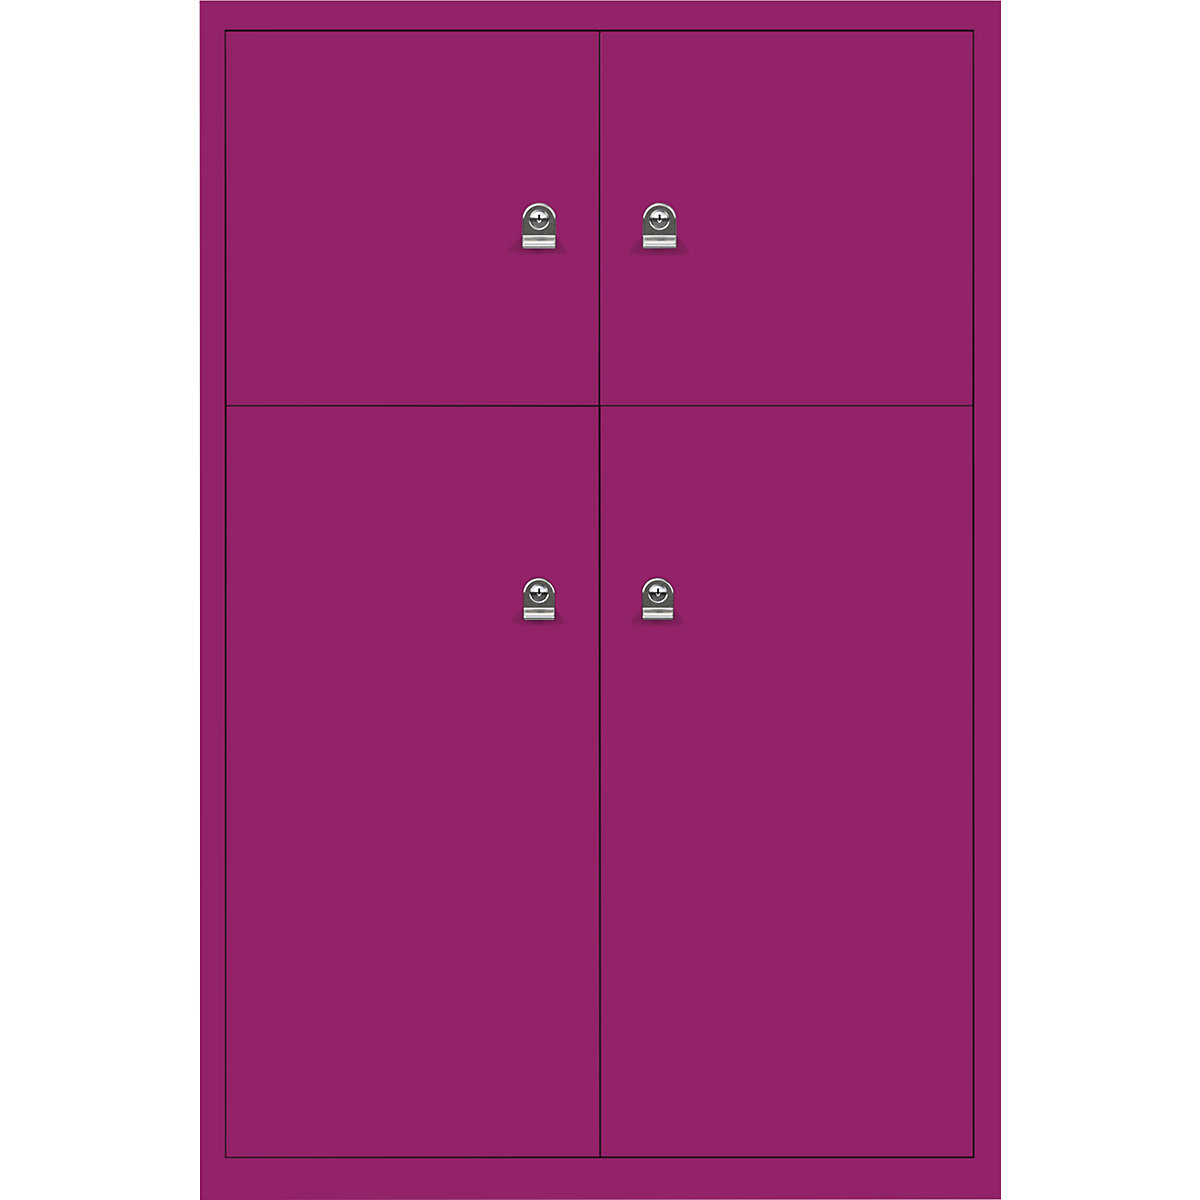 BISLEY – LateralFile™ lodge, with 4 lockable compartments, height 2 x 375 mm, 2 x 755 mm, fuchsia